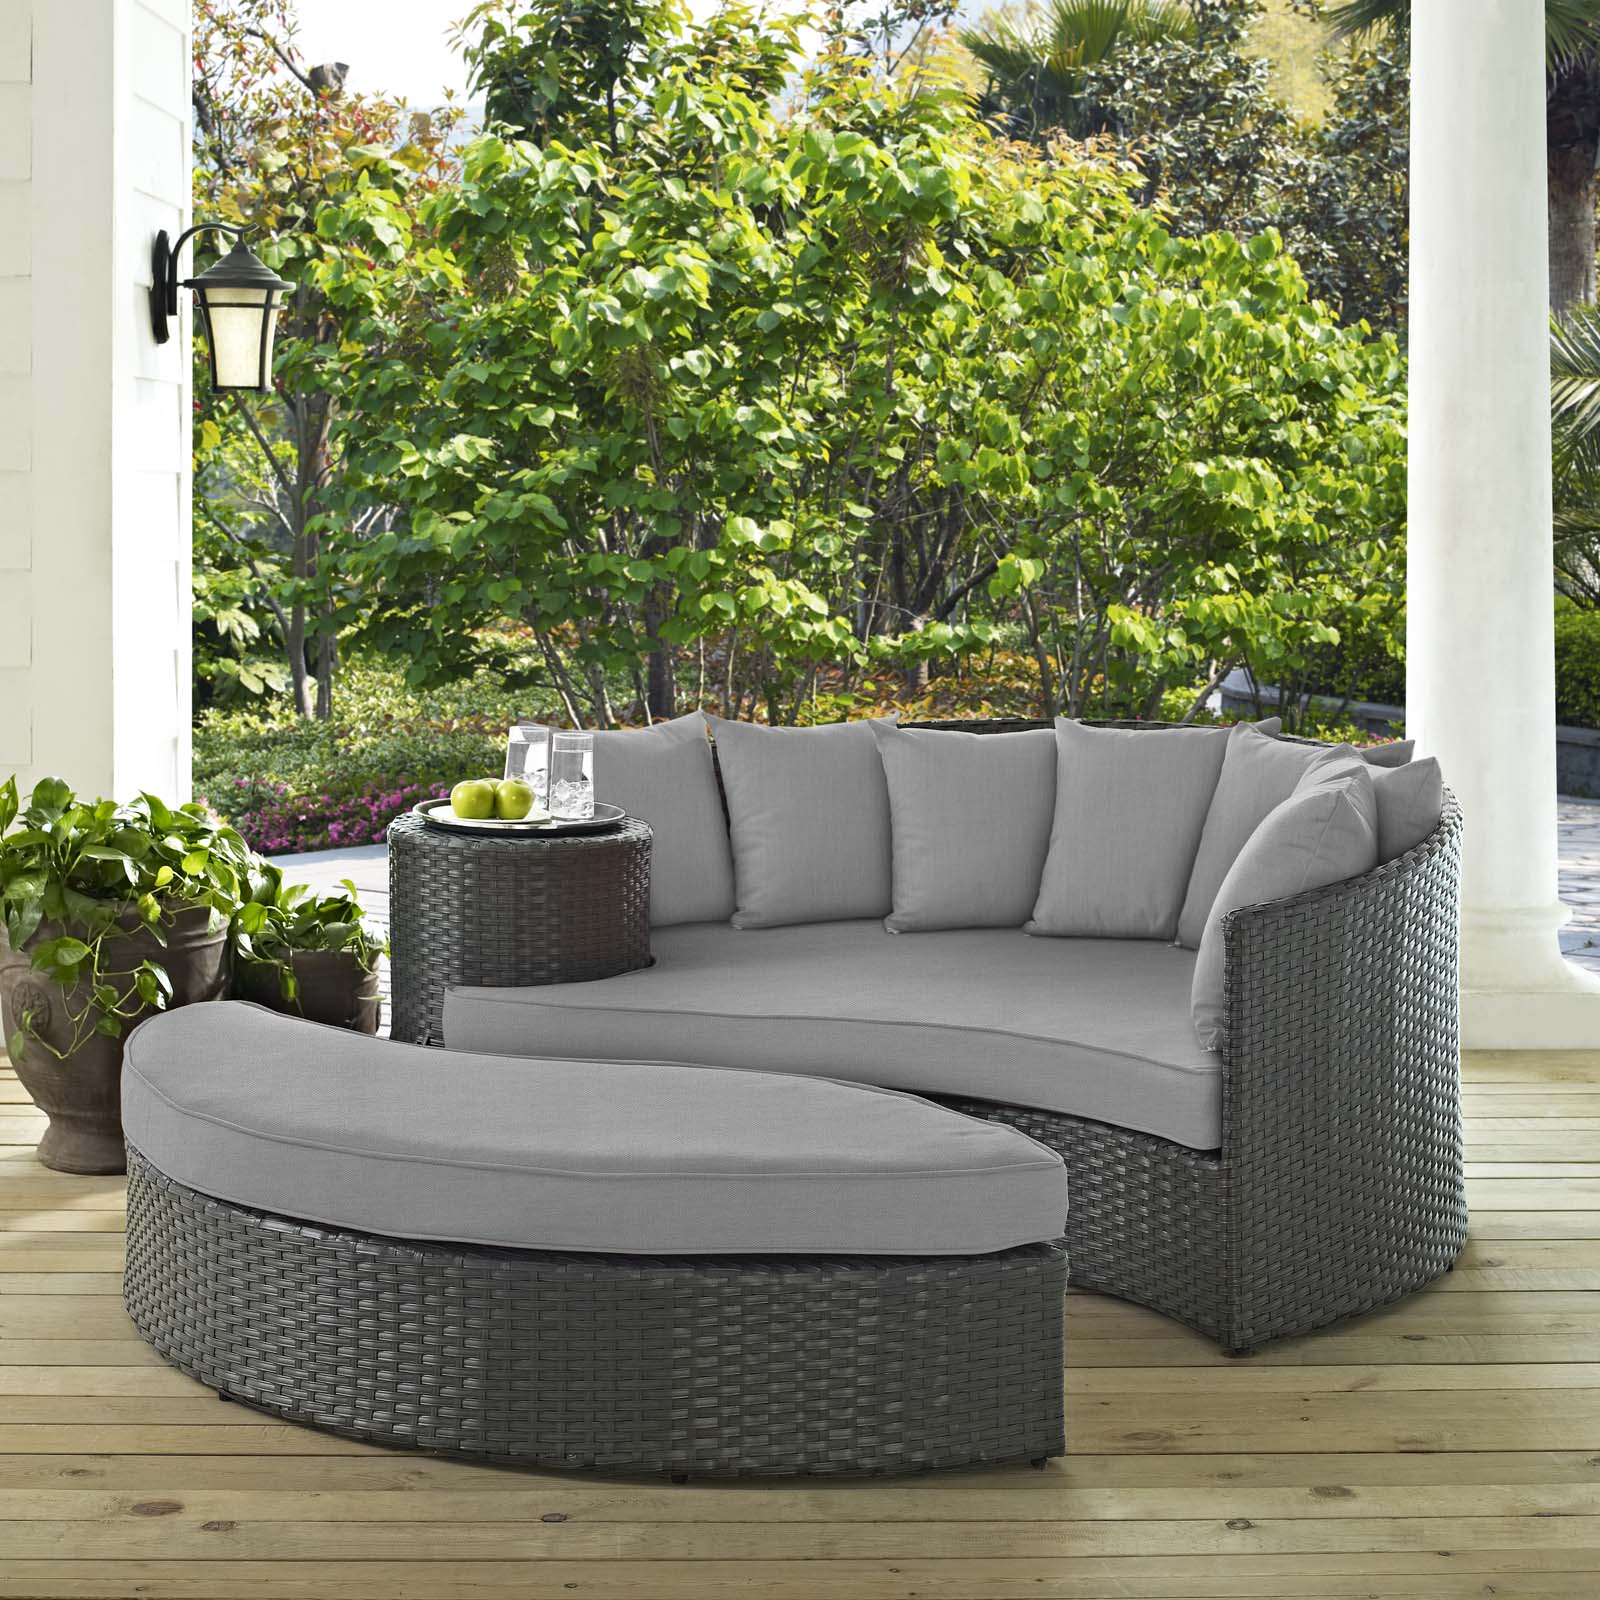 Modway Patio Daybeds - Sojourn Outdoor Patio Sunbrella 71"W Daybed Canvas Gray